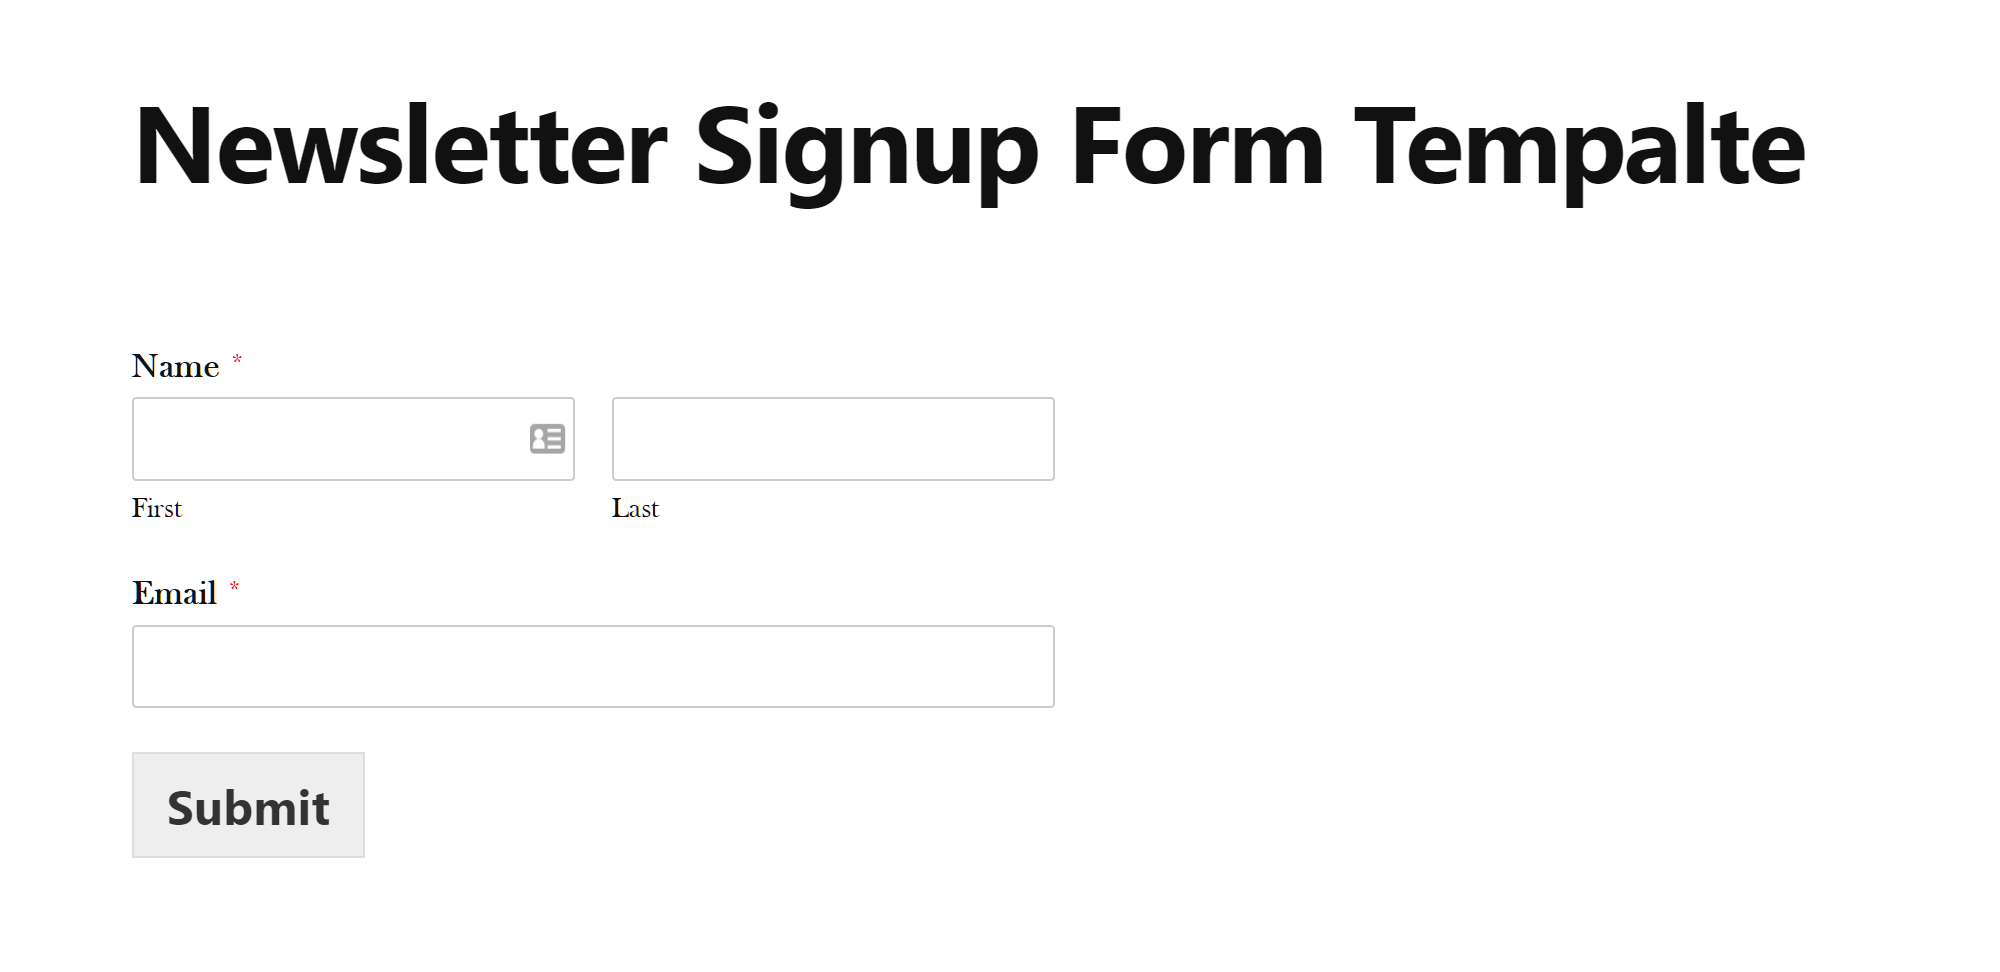 Newsletter Signup Form Template